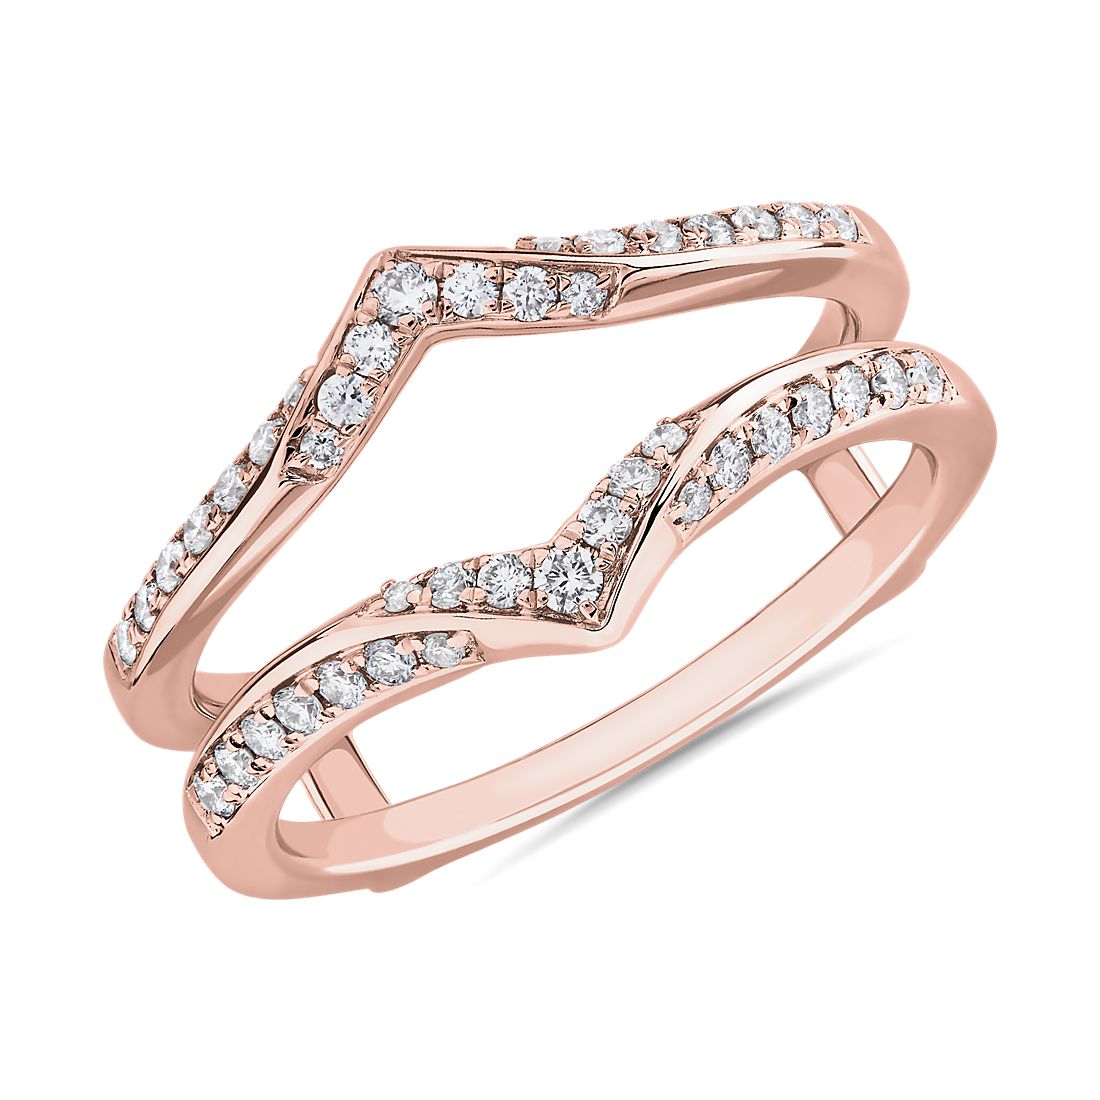 Pointed Diamond Insert in 18k Rose Gold (1/3 ct. tw.)